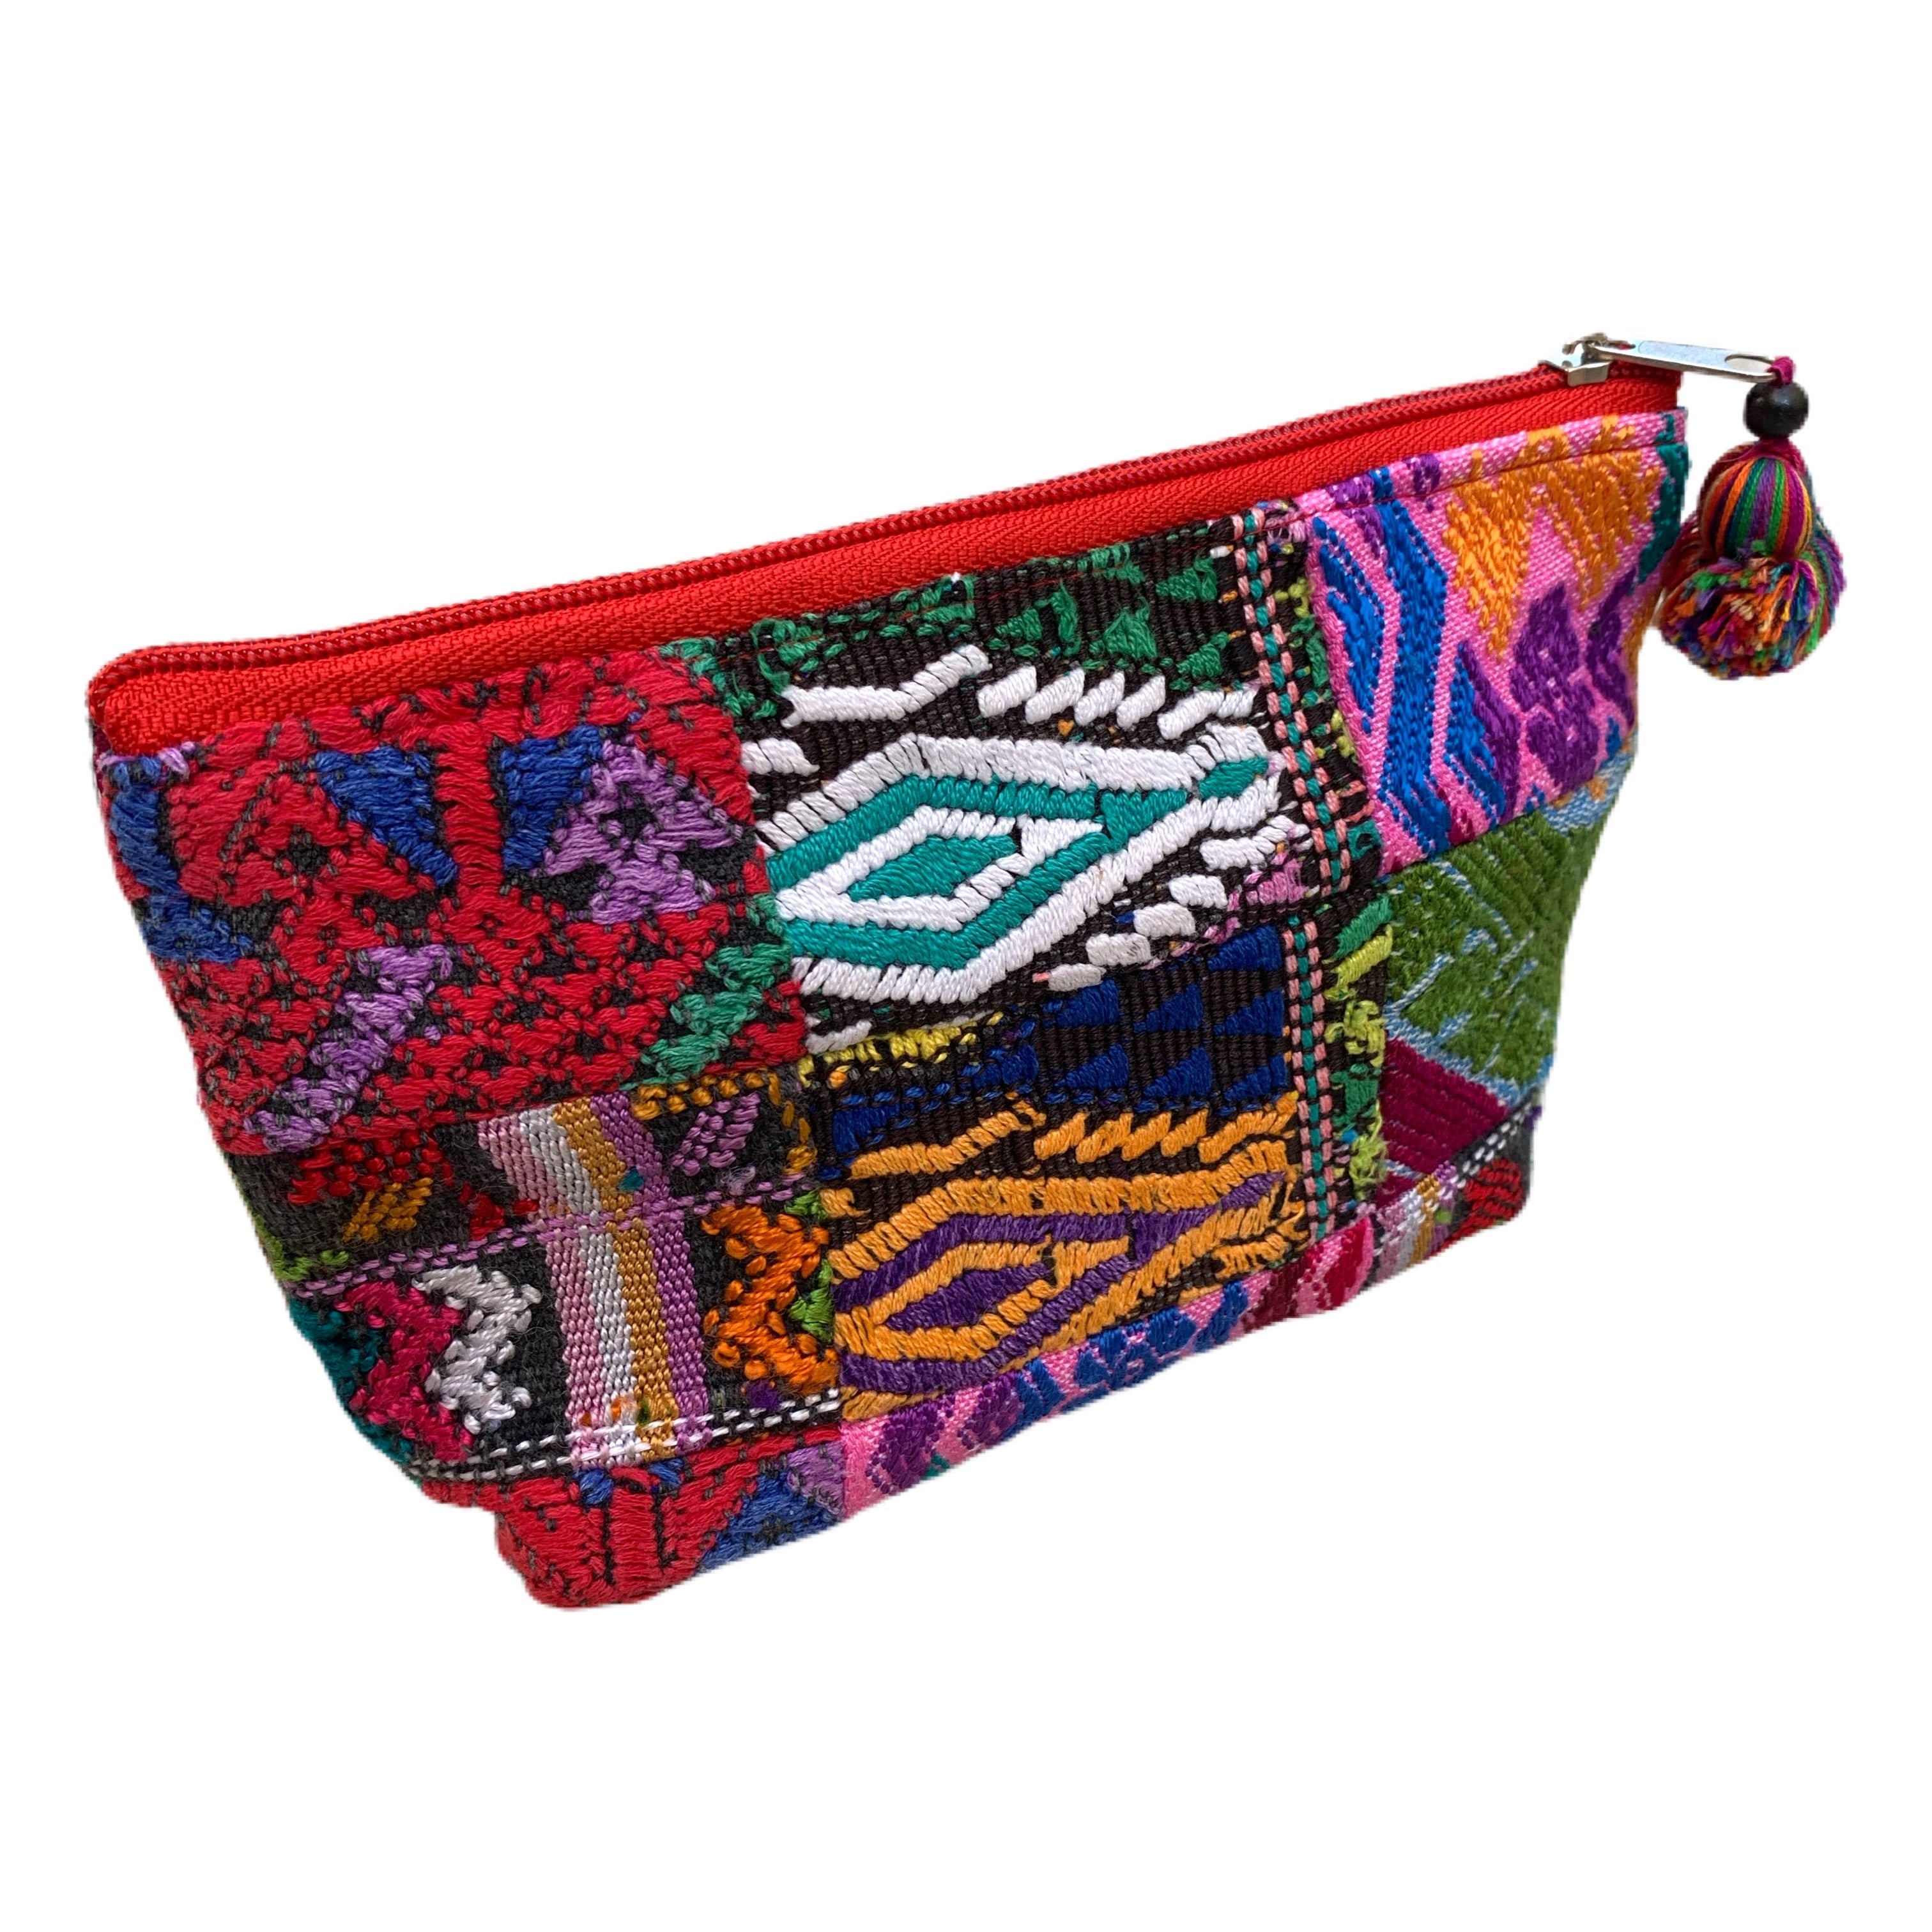 Small Patchwork Huipil Fabric Cosmetic/ Everything Bag with Plastic Lining